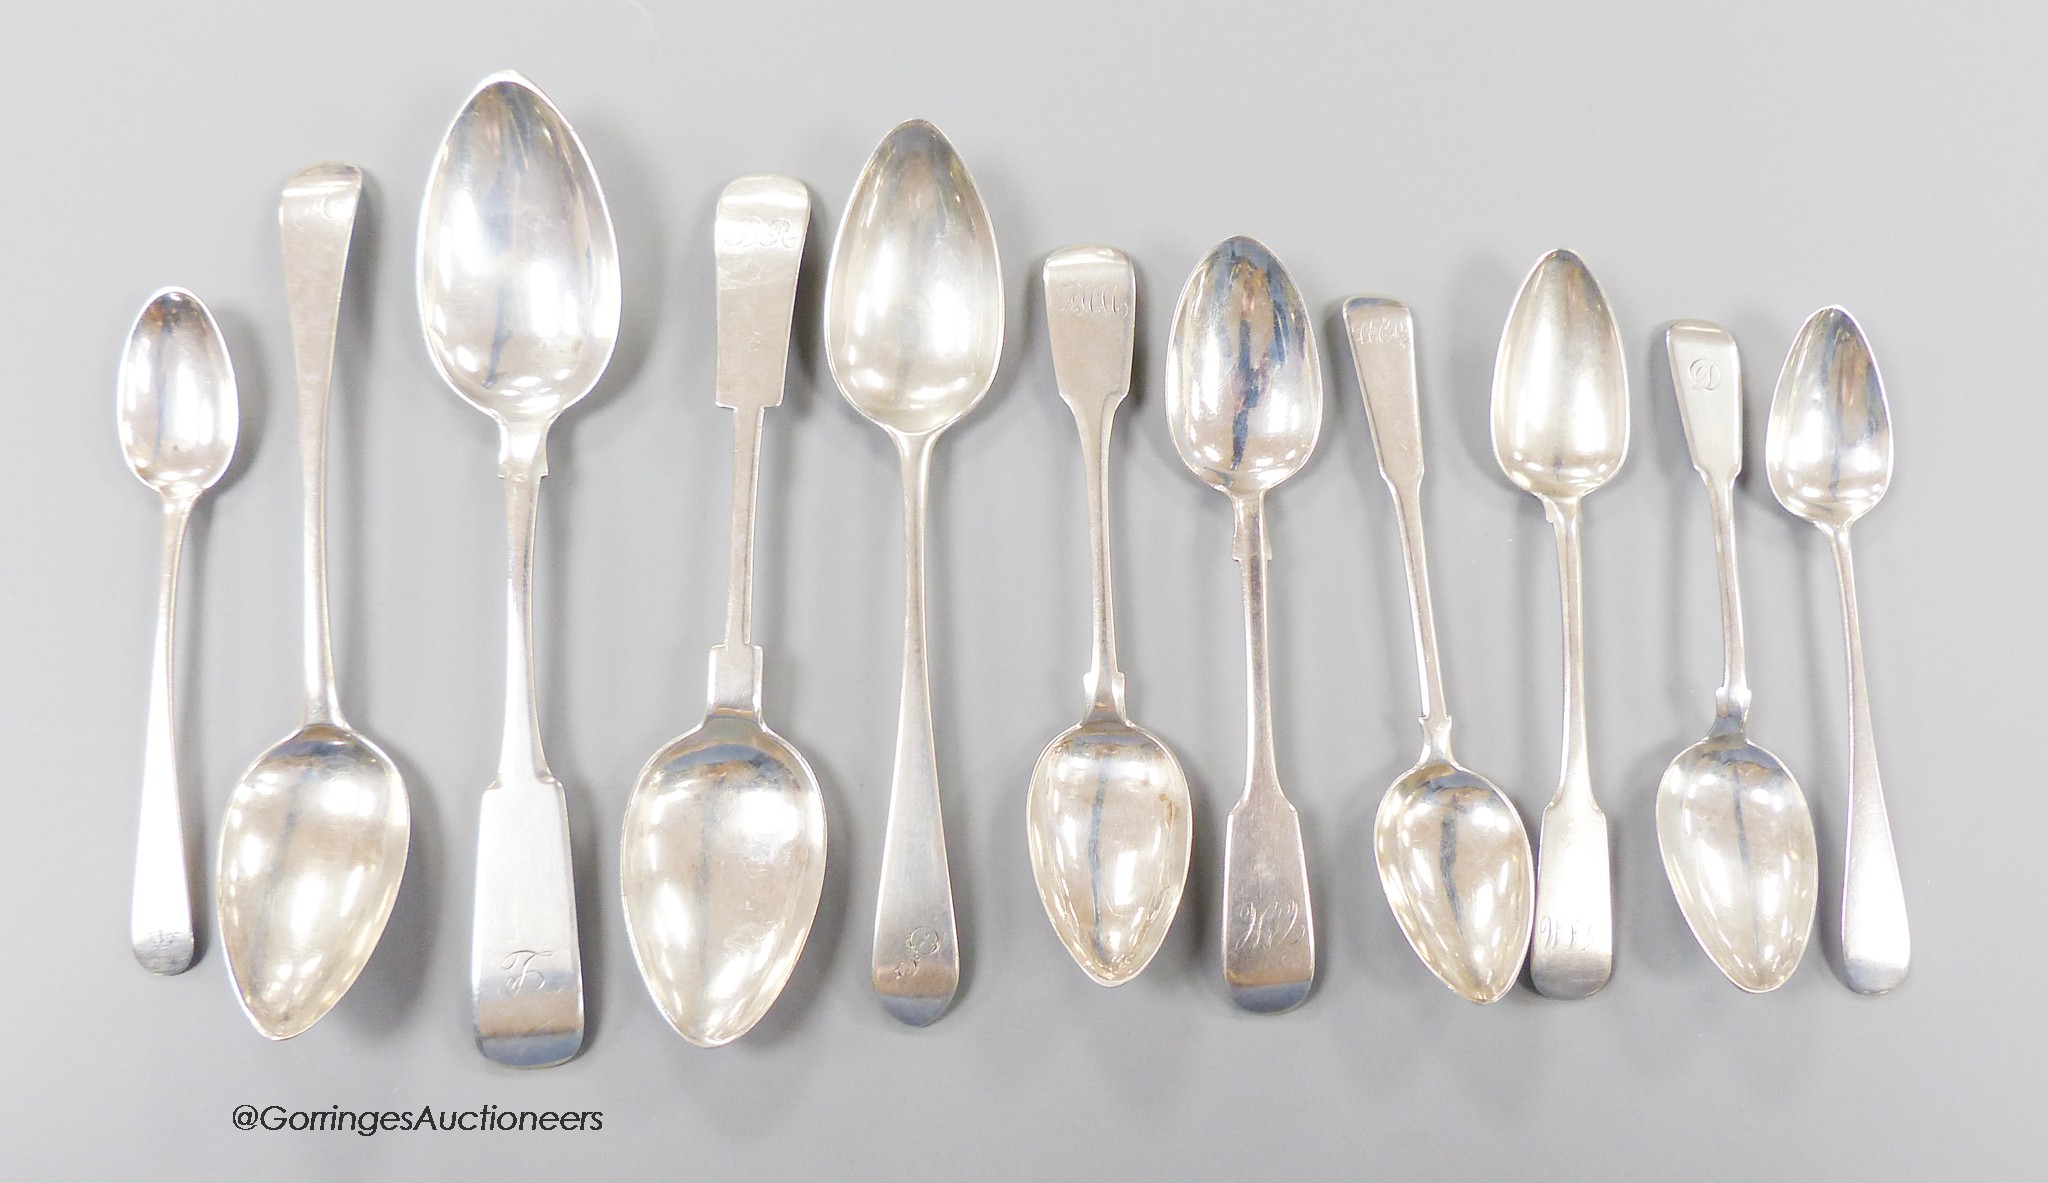 A collection of eleven 19th century Scottish provincial Aberdeen flatware, comprising four dessert spoons, (John Leslie, Nathaniel Gillert, Peter Ross & James Erskine) and seven teaspoons, (William Jamieson(2), James Ers